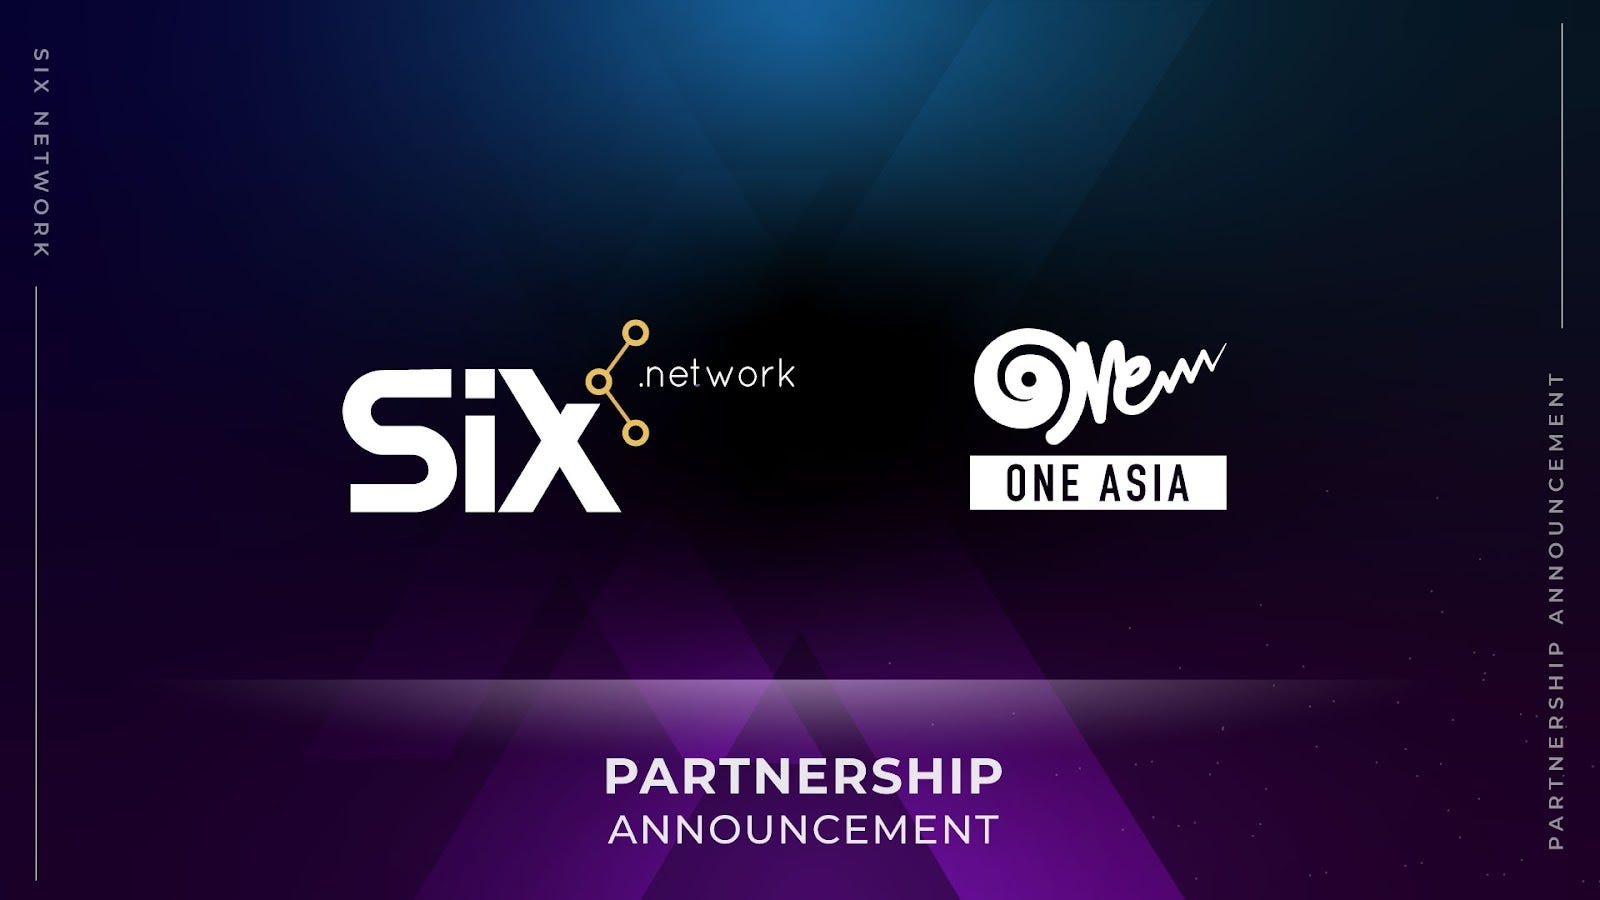 SIX Network has announced a partnership with One Asia Ventures